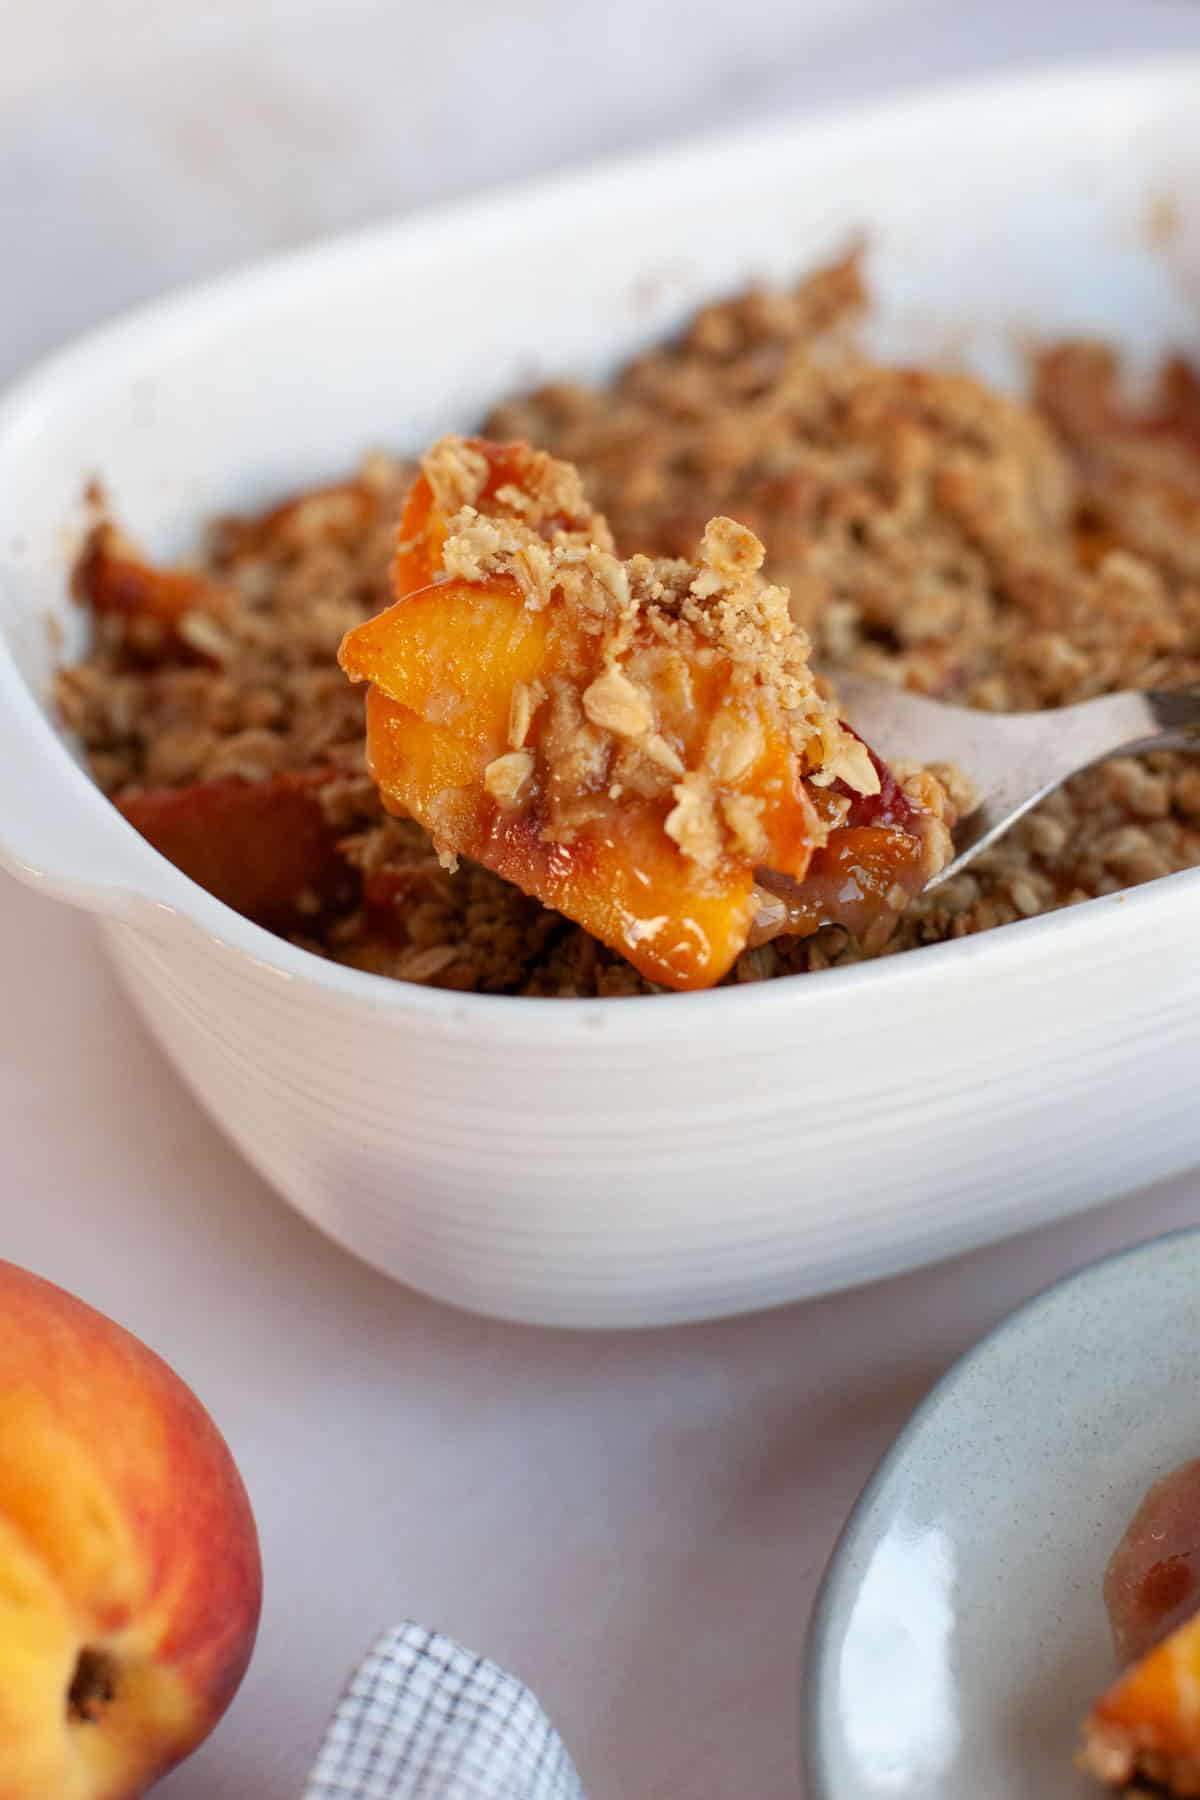 A small serving of peach crisp being spooned out of a white serving dish.